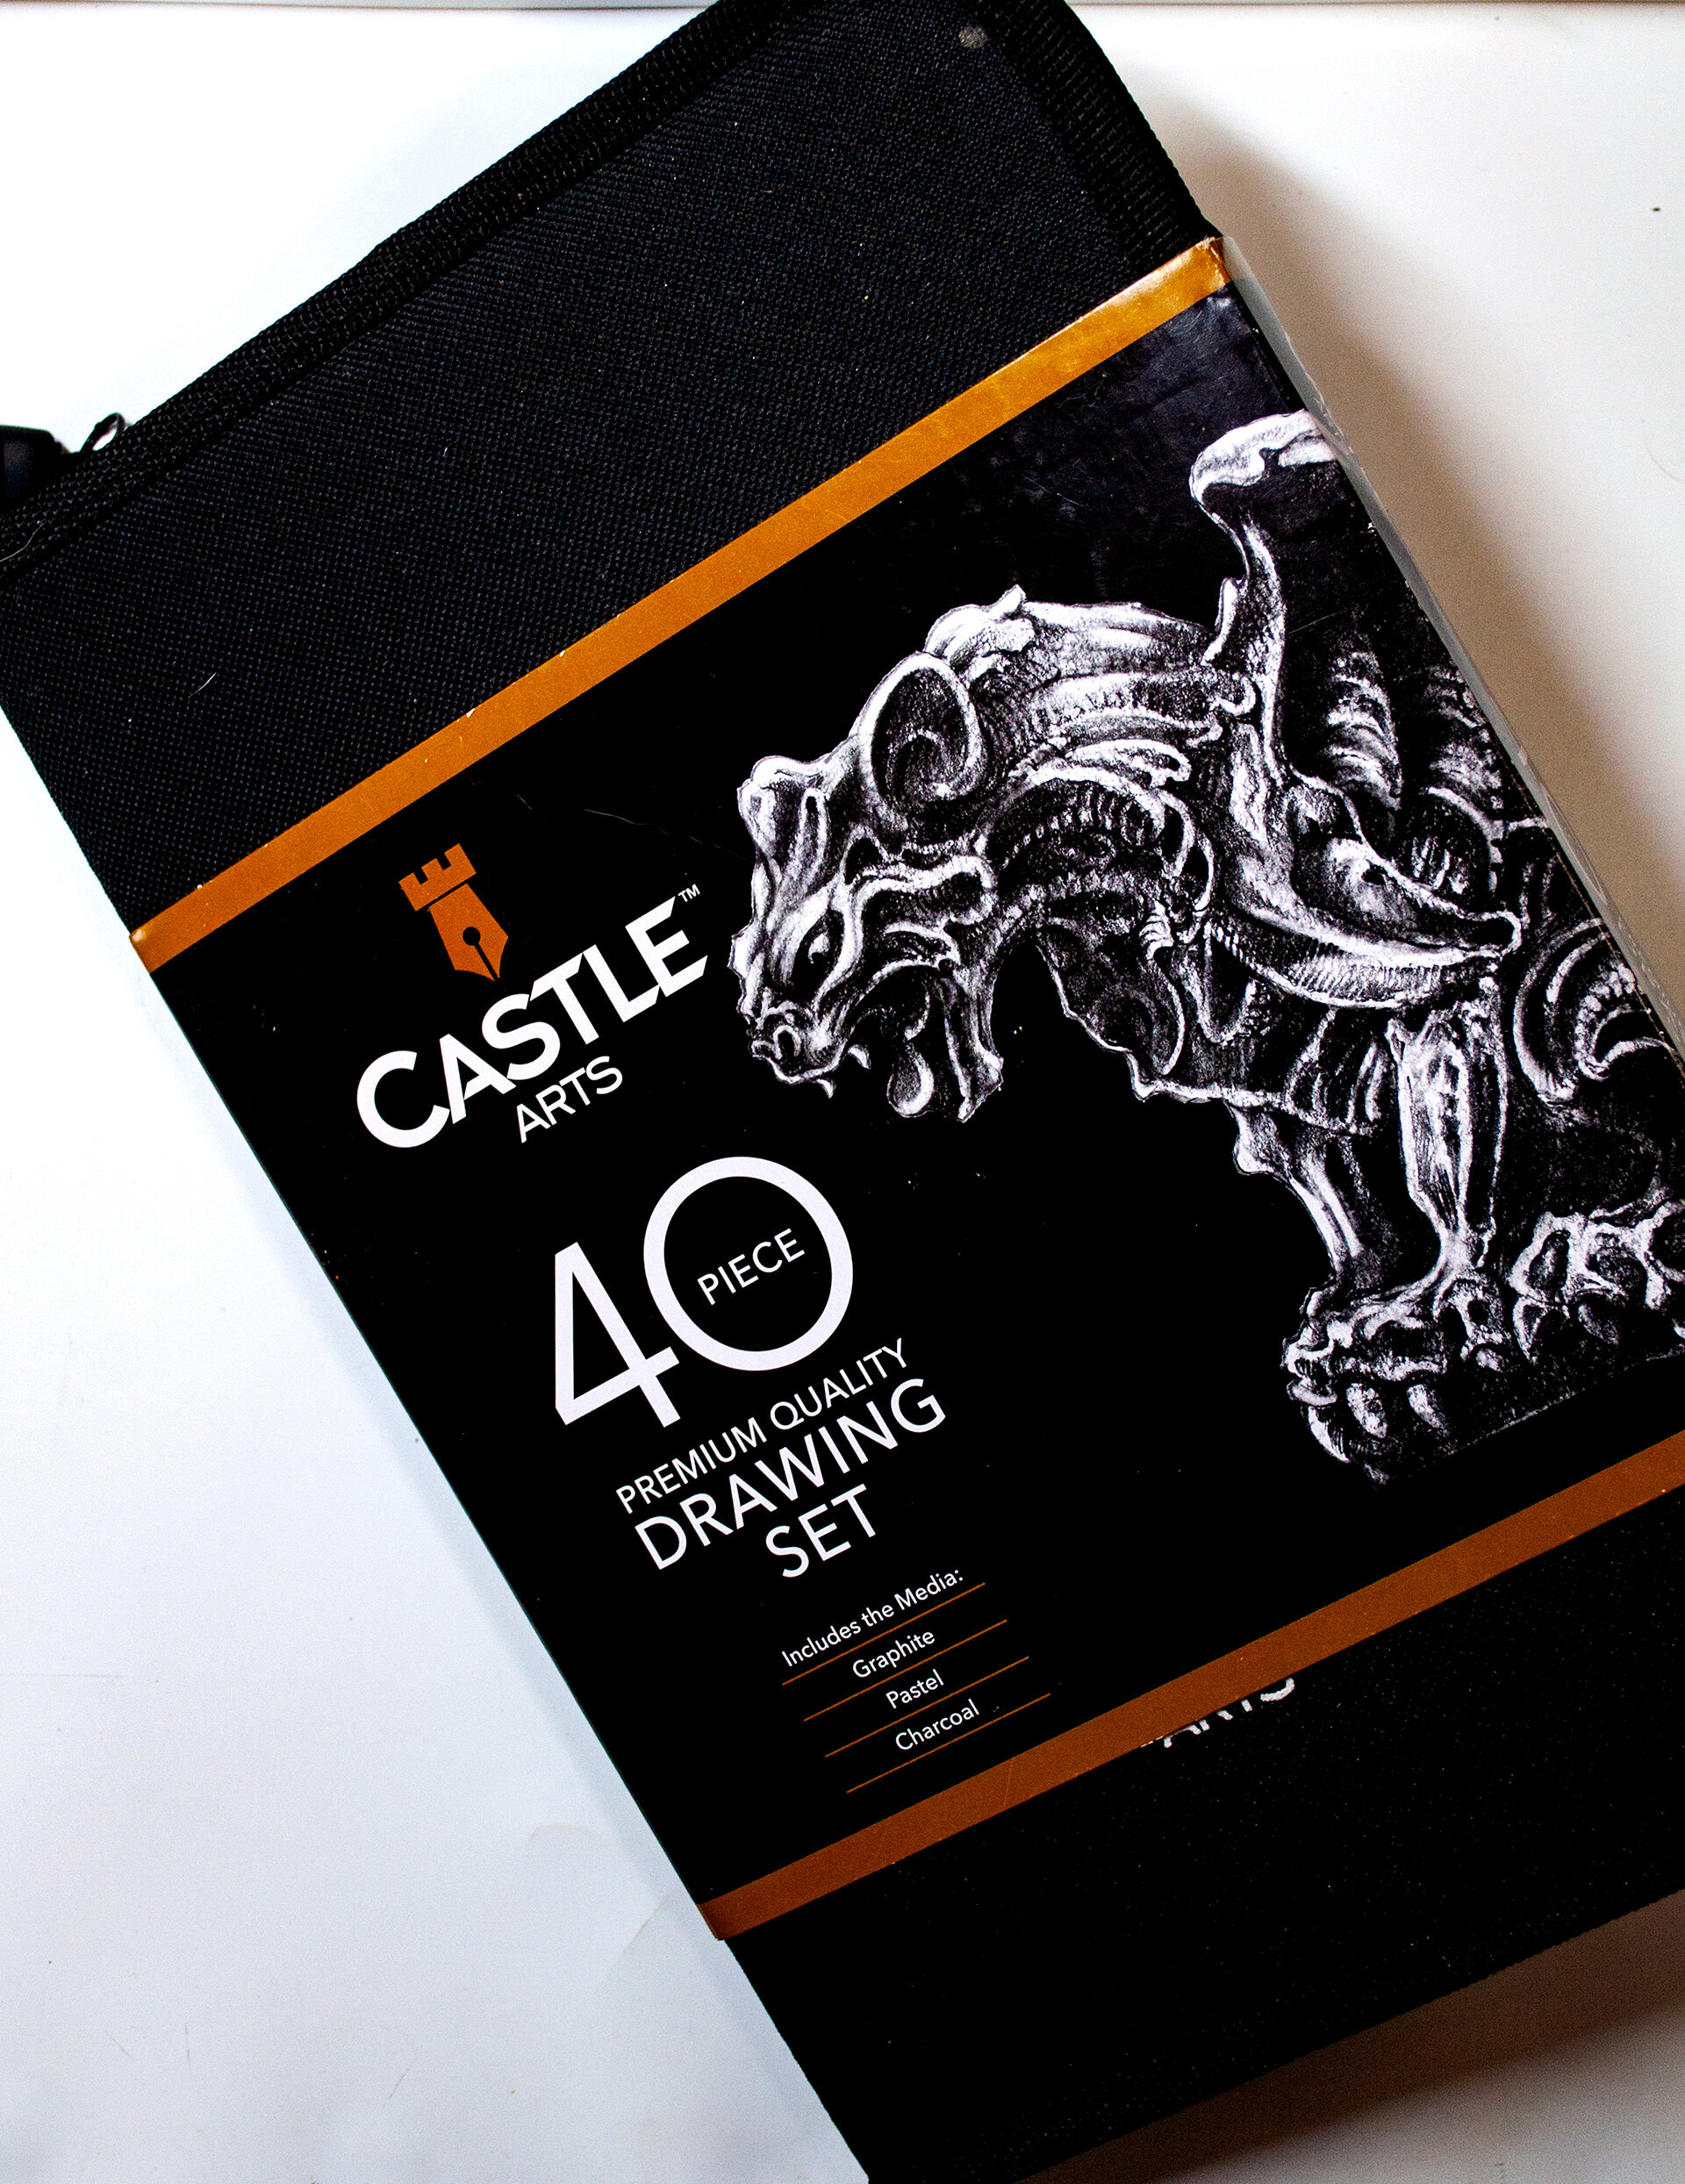 Review Of The Castle Art 40 Piece Drawing Set — The Art Gear Guide